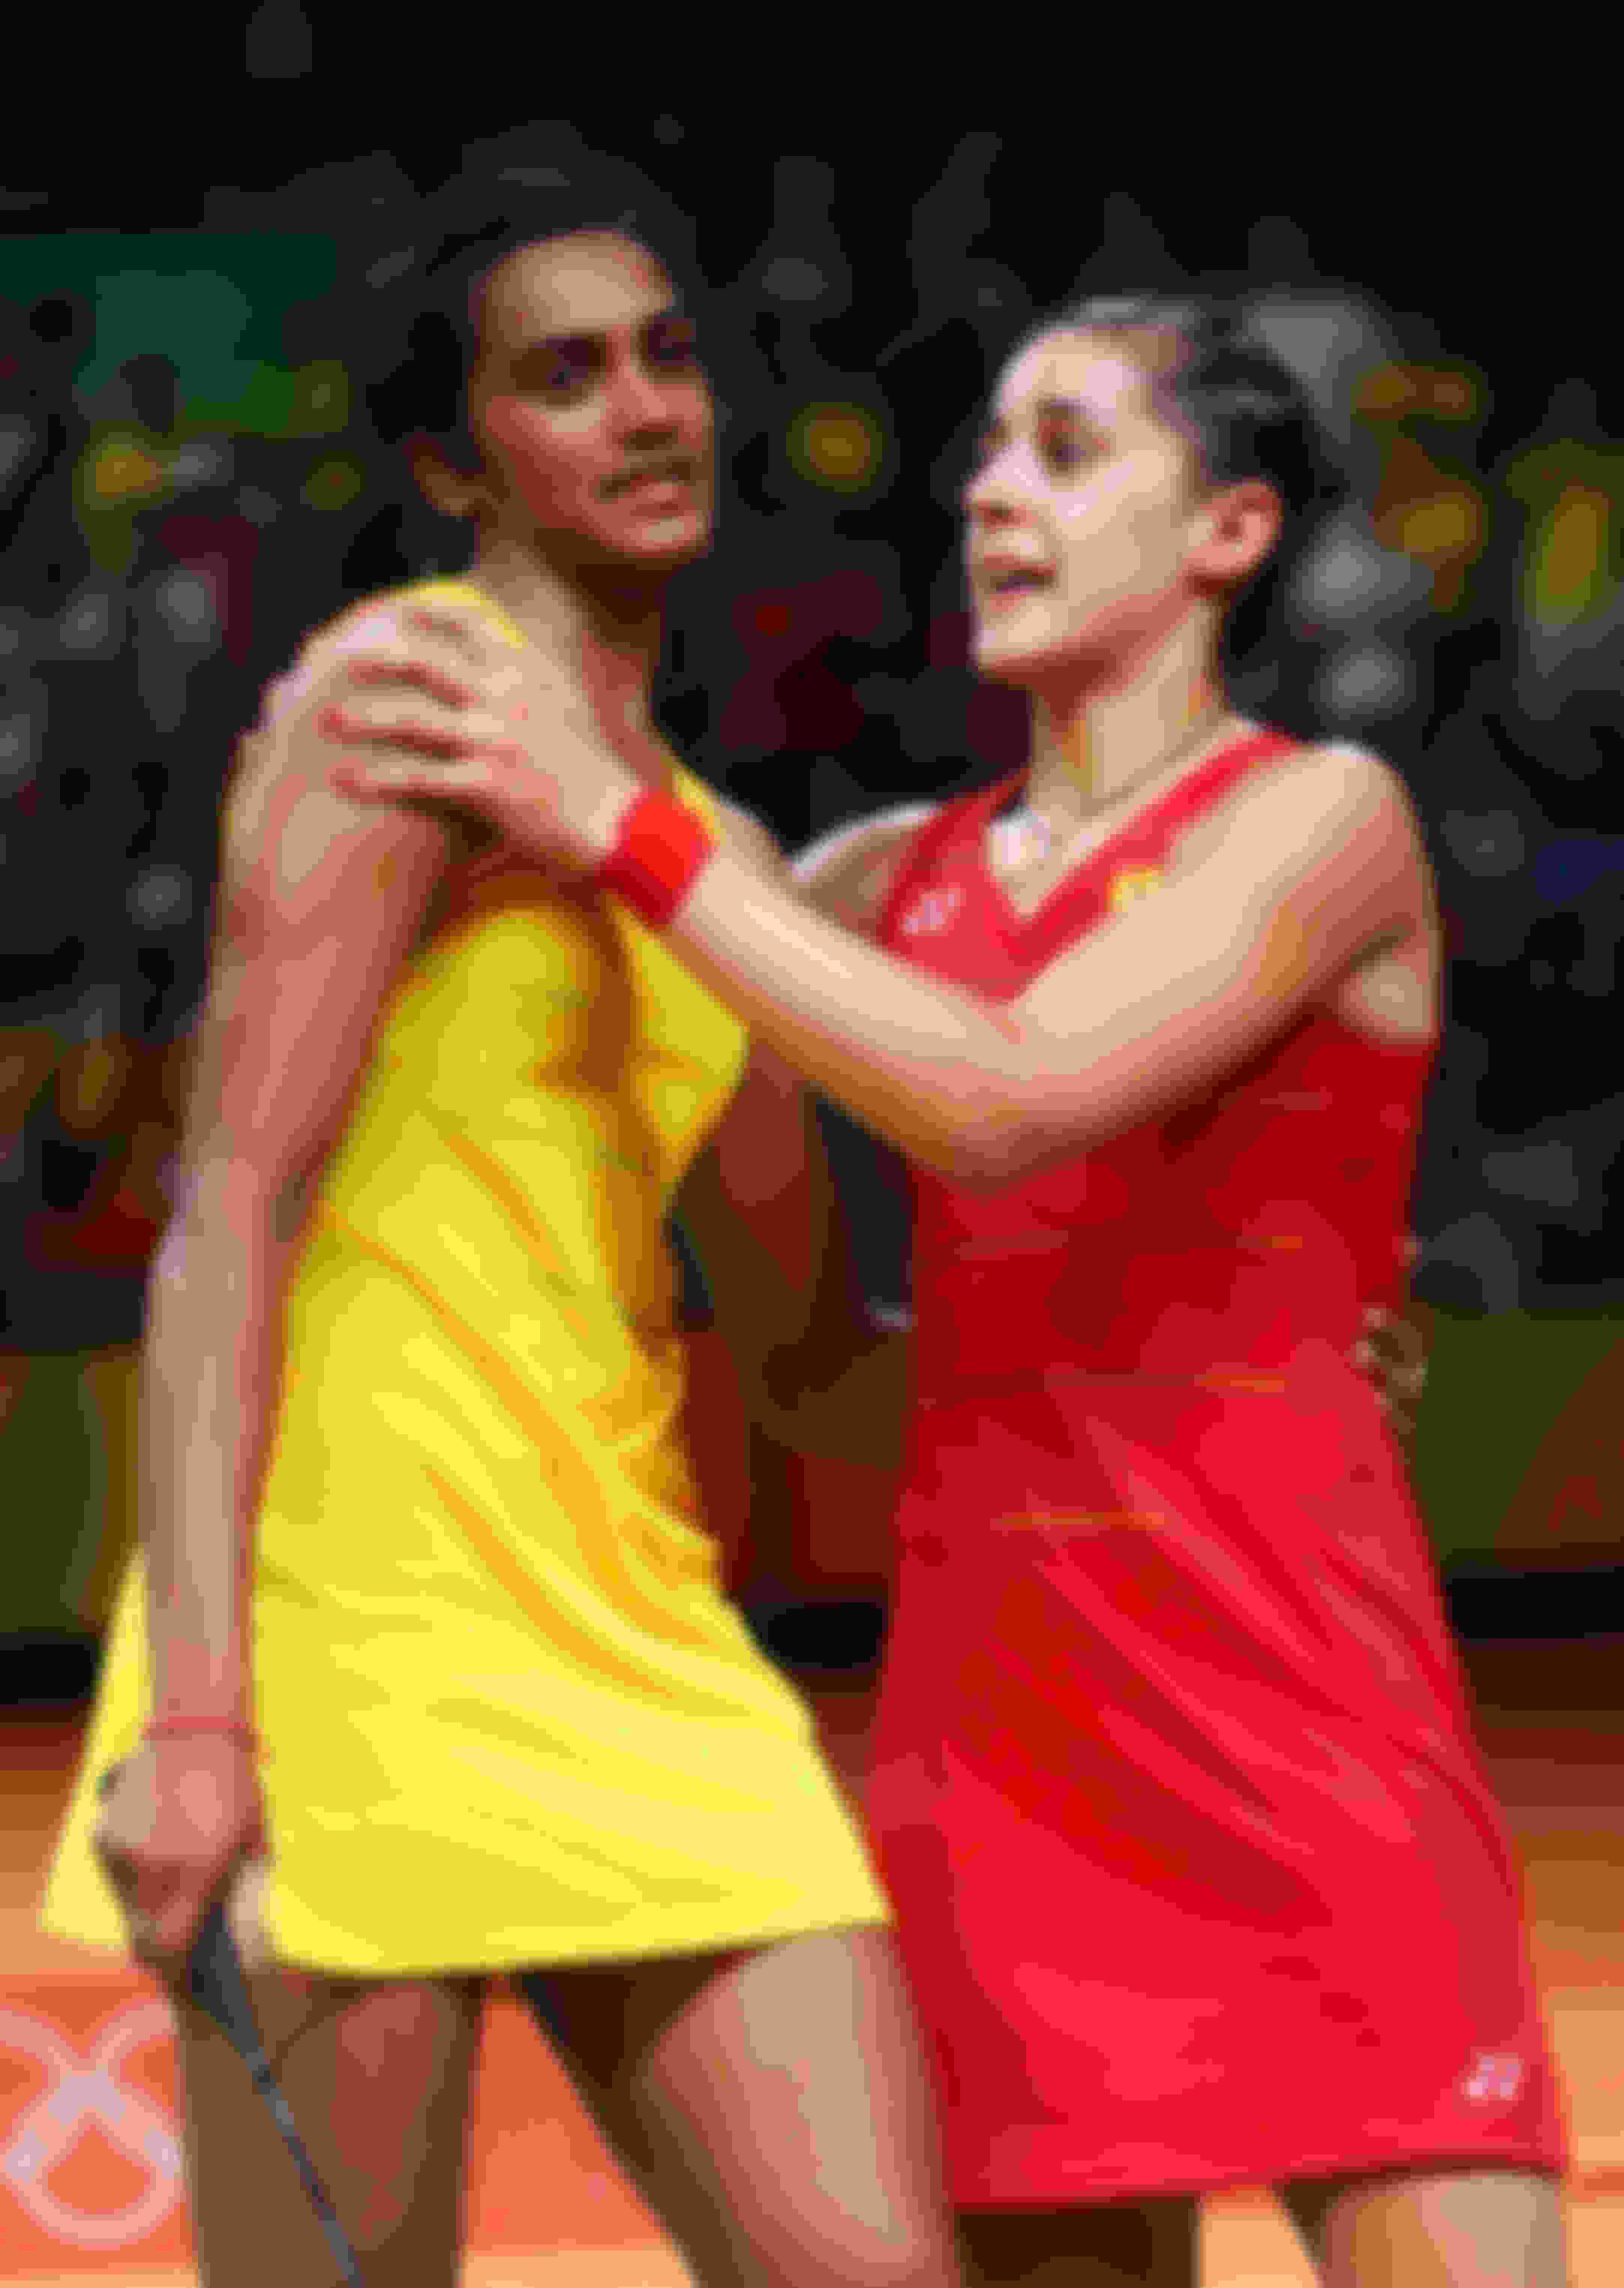 Carolina Marin (right) is the first European woman to become Olympic champion.